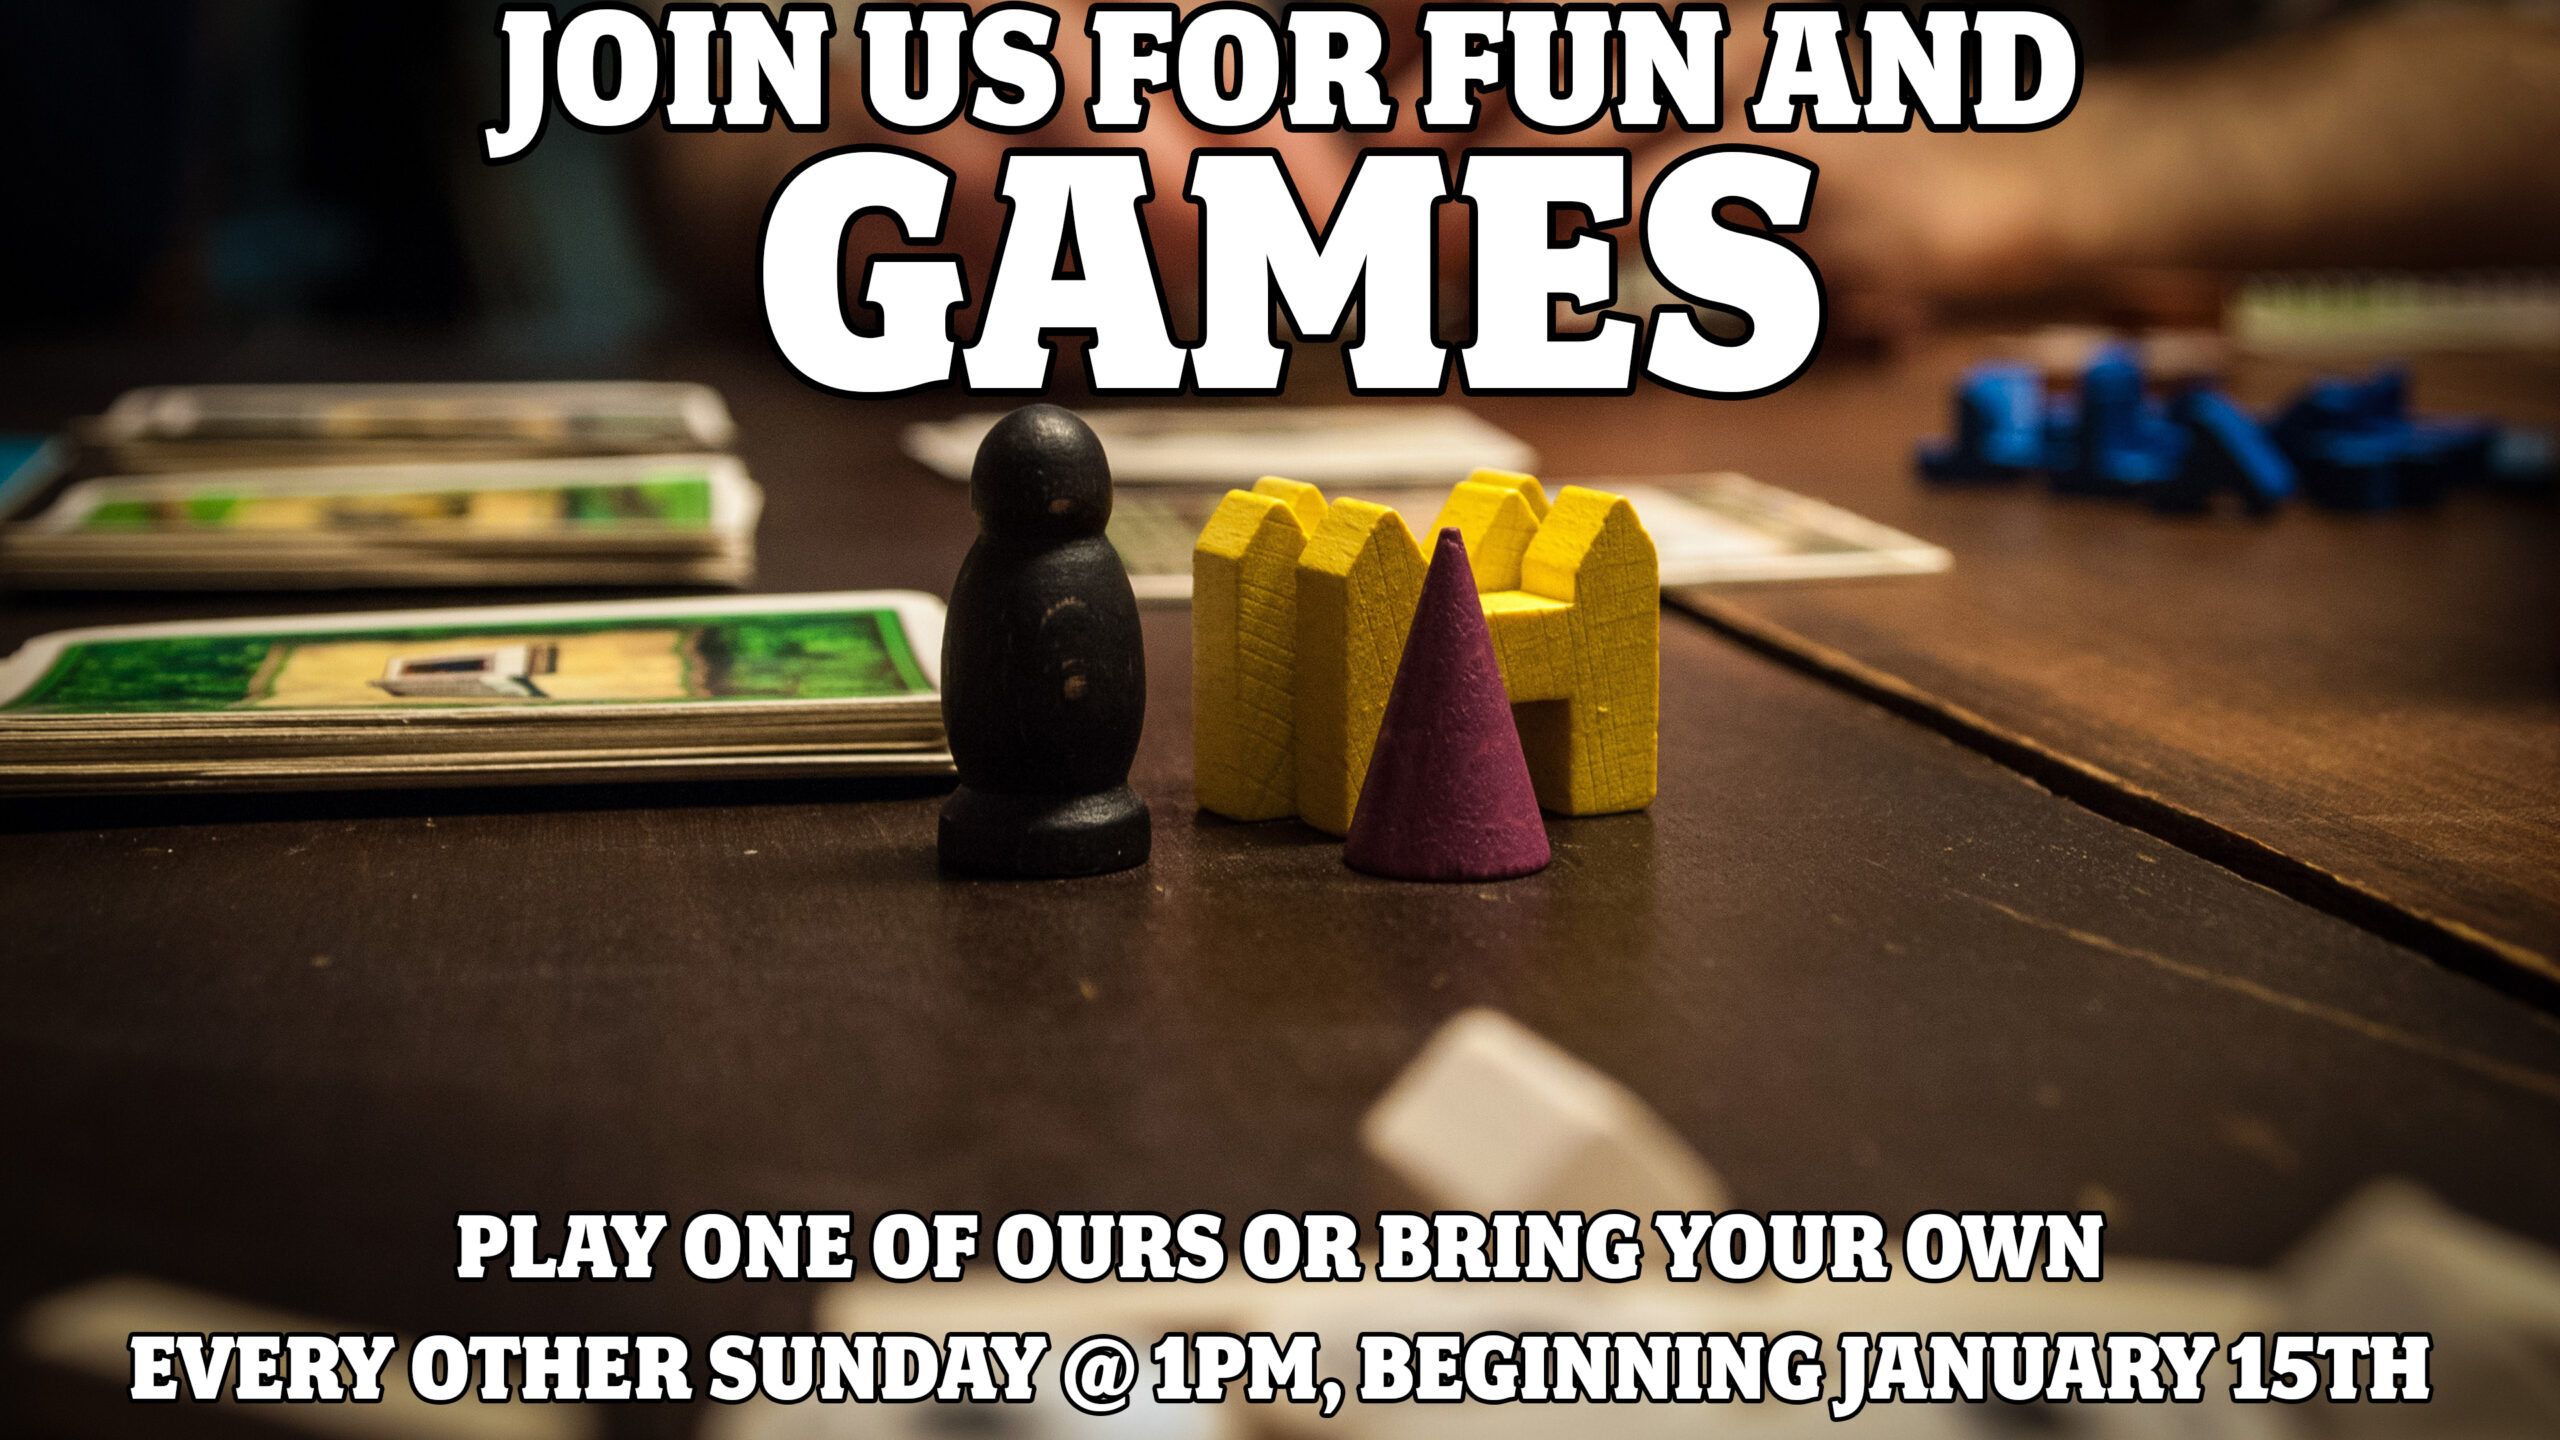 Join us for fun and games! Play one of ours or bring your own, every other Sunday @ 1pm, beginning January 15th